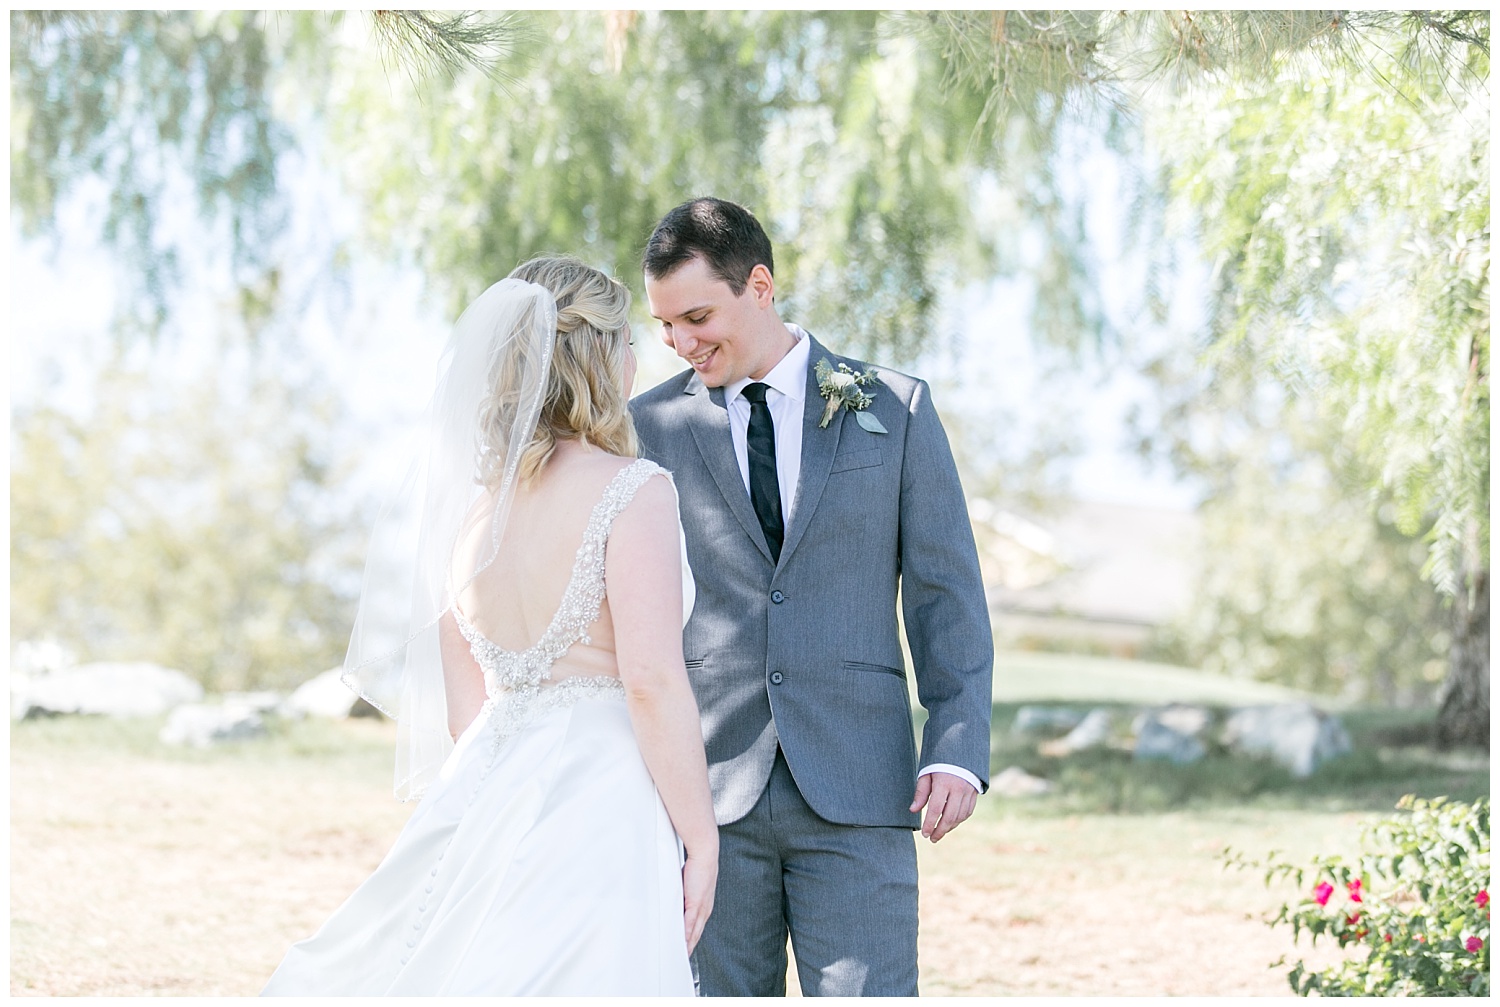 catherine + tim - bella collina golf course - san clemente california - wedding party - bride and groom couples portraits-0055